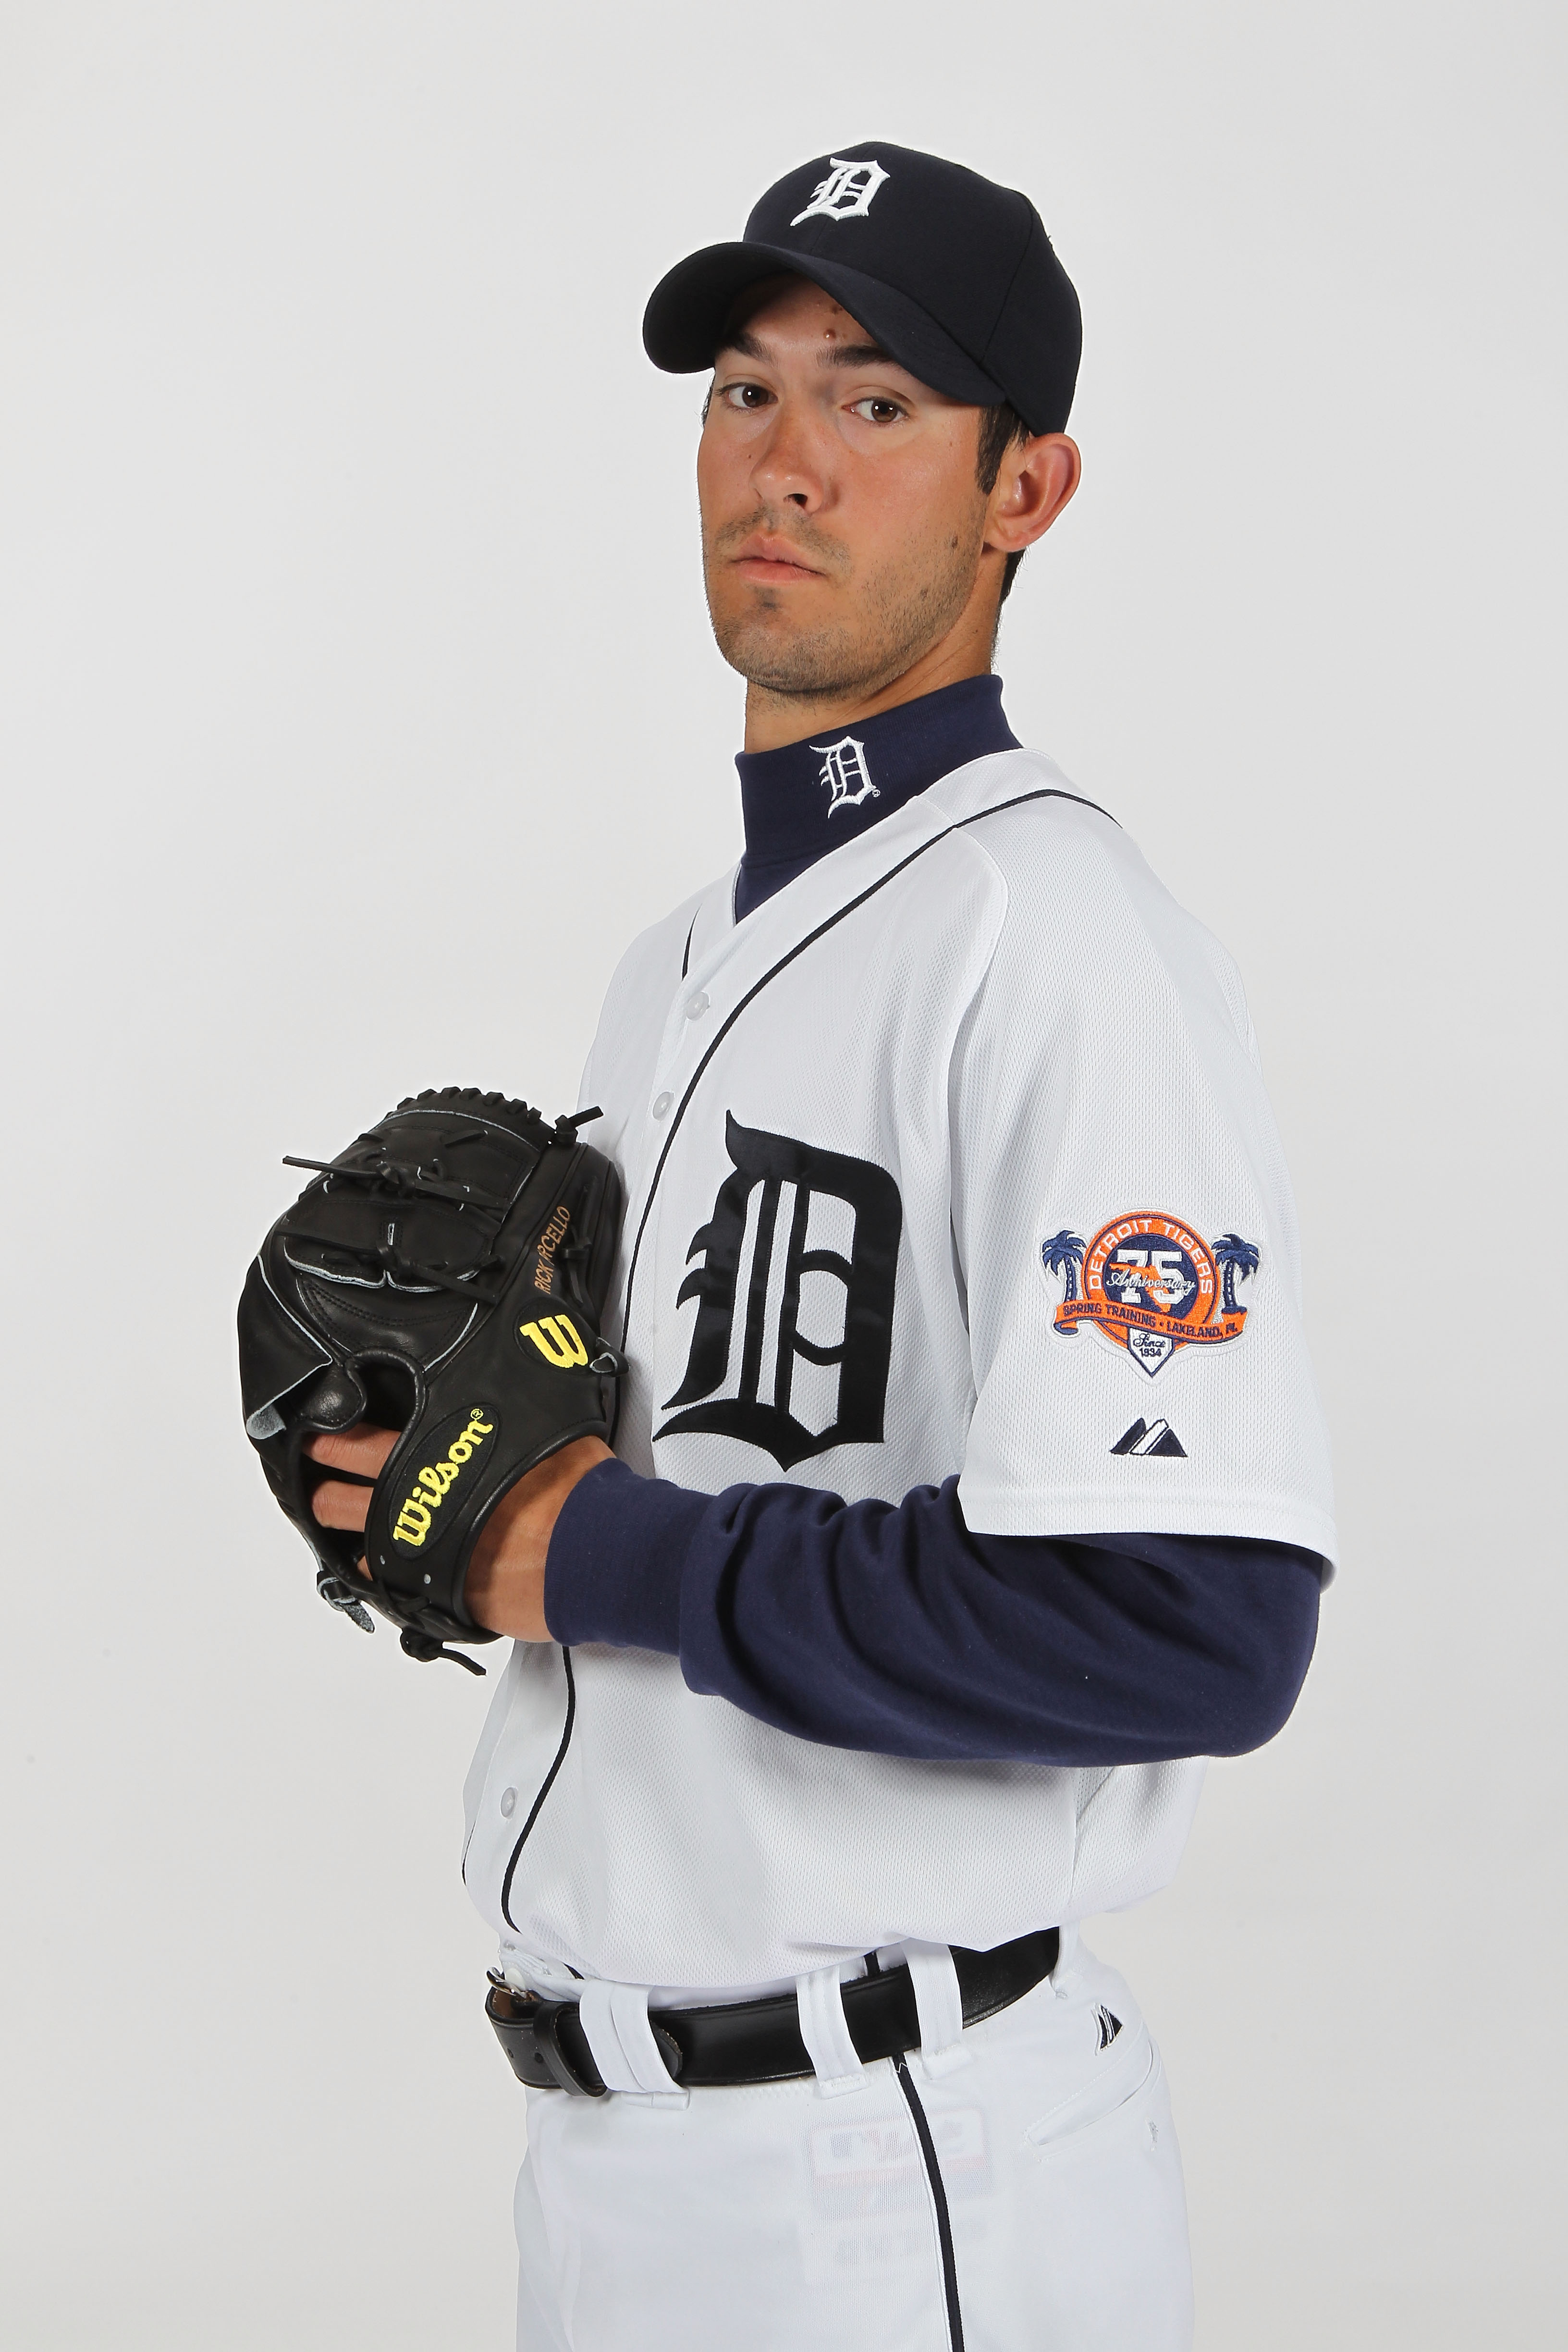 LAKELAND, FL - FEBRUARY 21:  Rick Porcello #48 of the Detroit Tigers poses for a portrait during Photo Day on February 21, 2011  at Joker Marchant Stadium in Lakeland, Florida.  (Photo by Nick Laham/Getty Images)